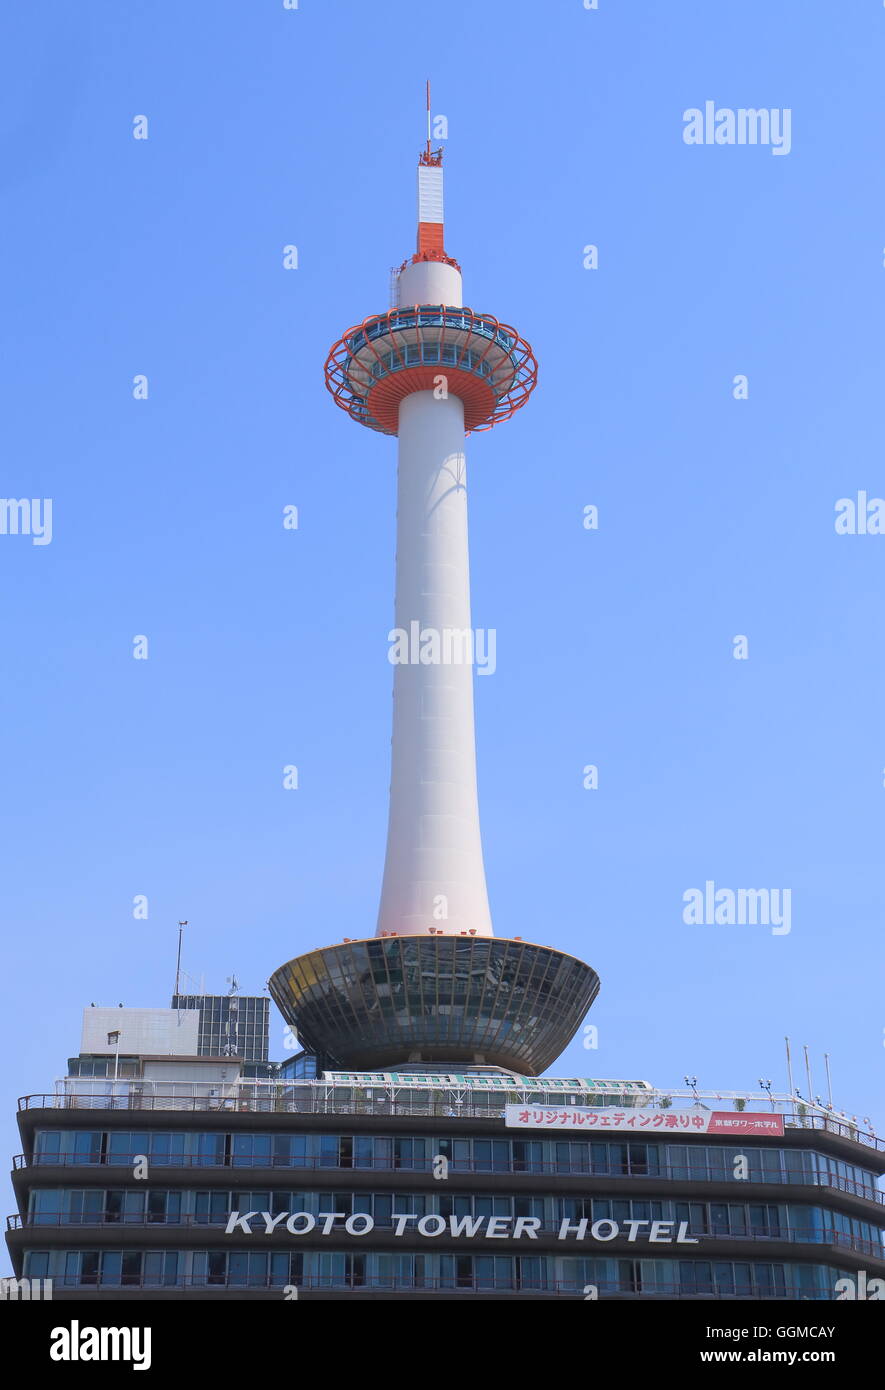 Kyoto Tower and Kyoto Tower Hotel in Kyoto Japan Stock Photo